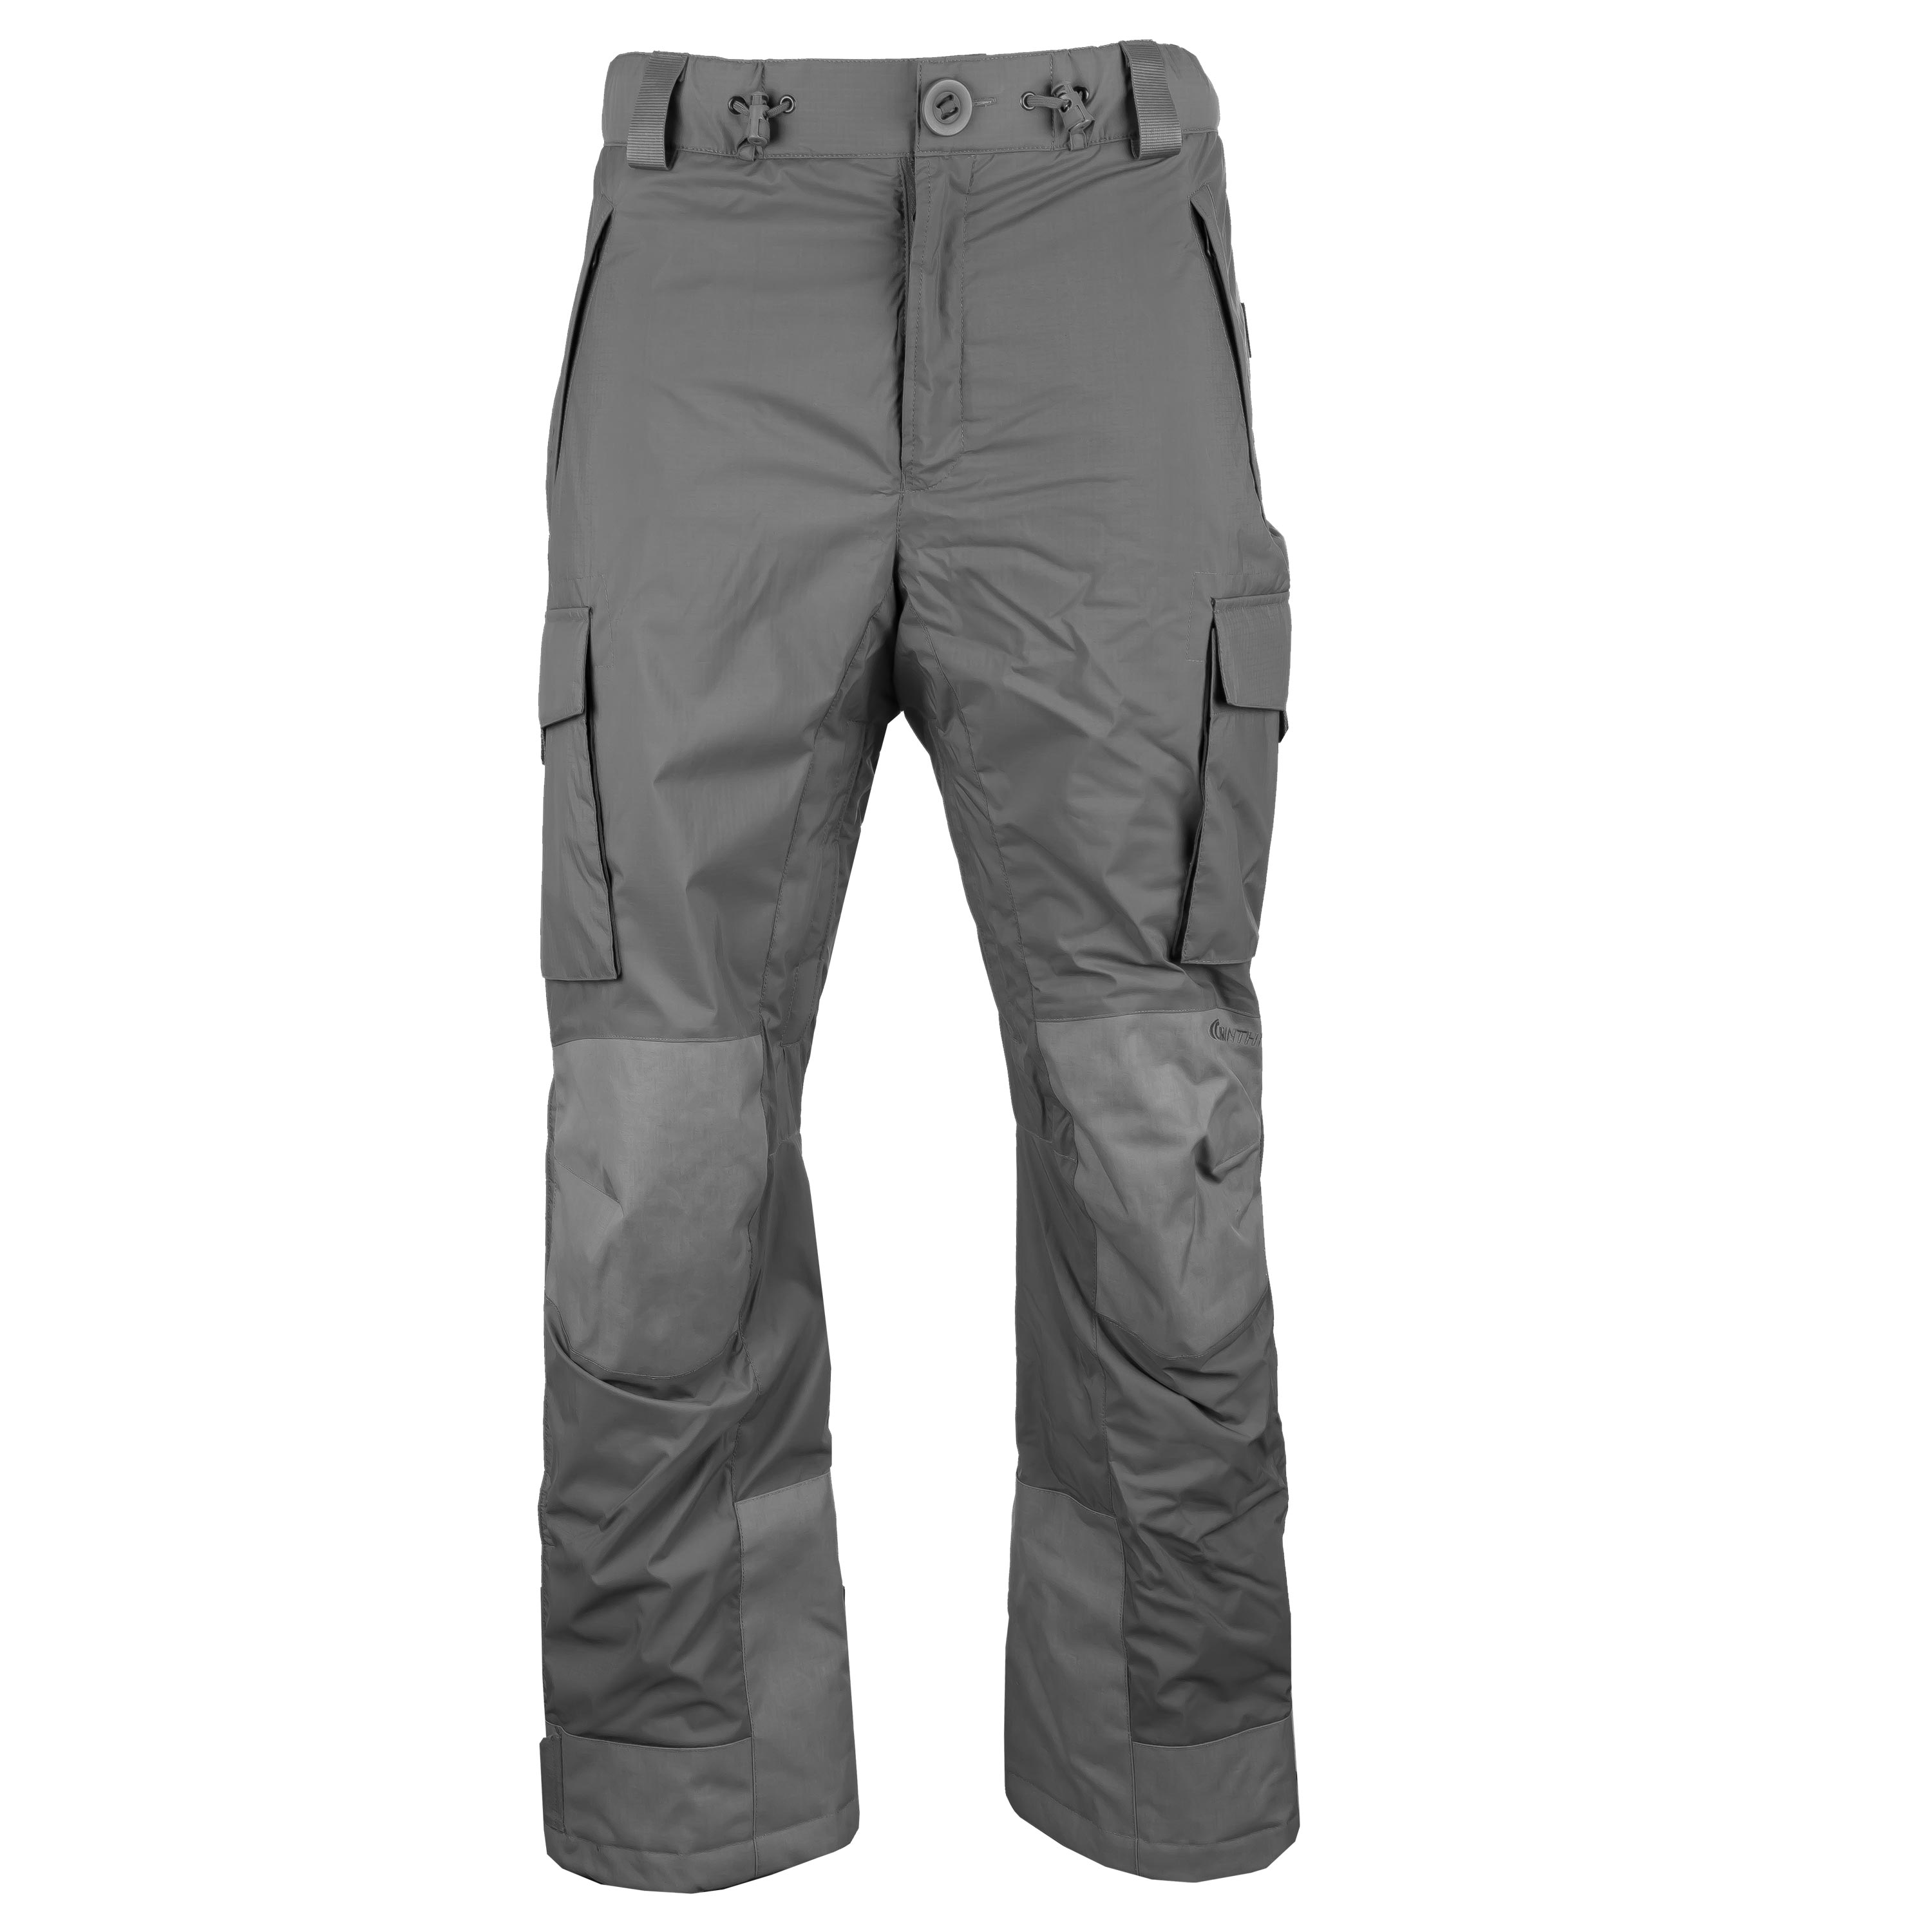 Purchase the Carinthia Pants MIG 4.0 gray by ASMC